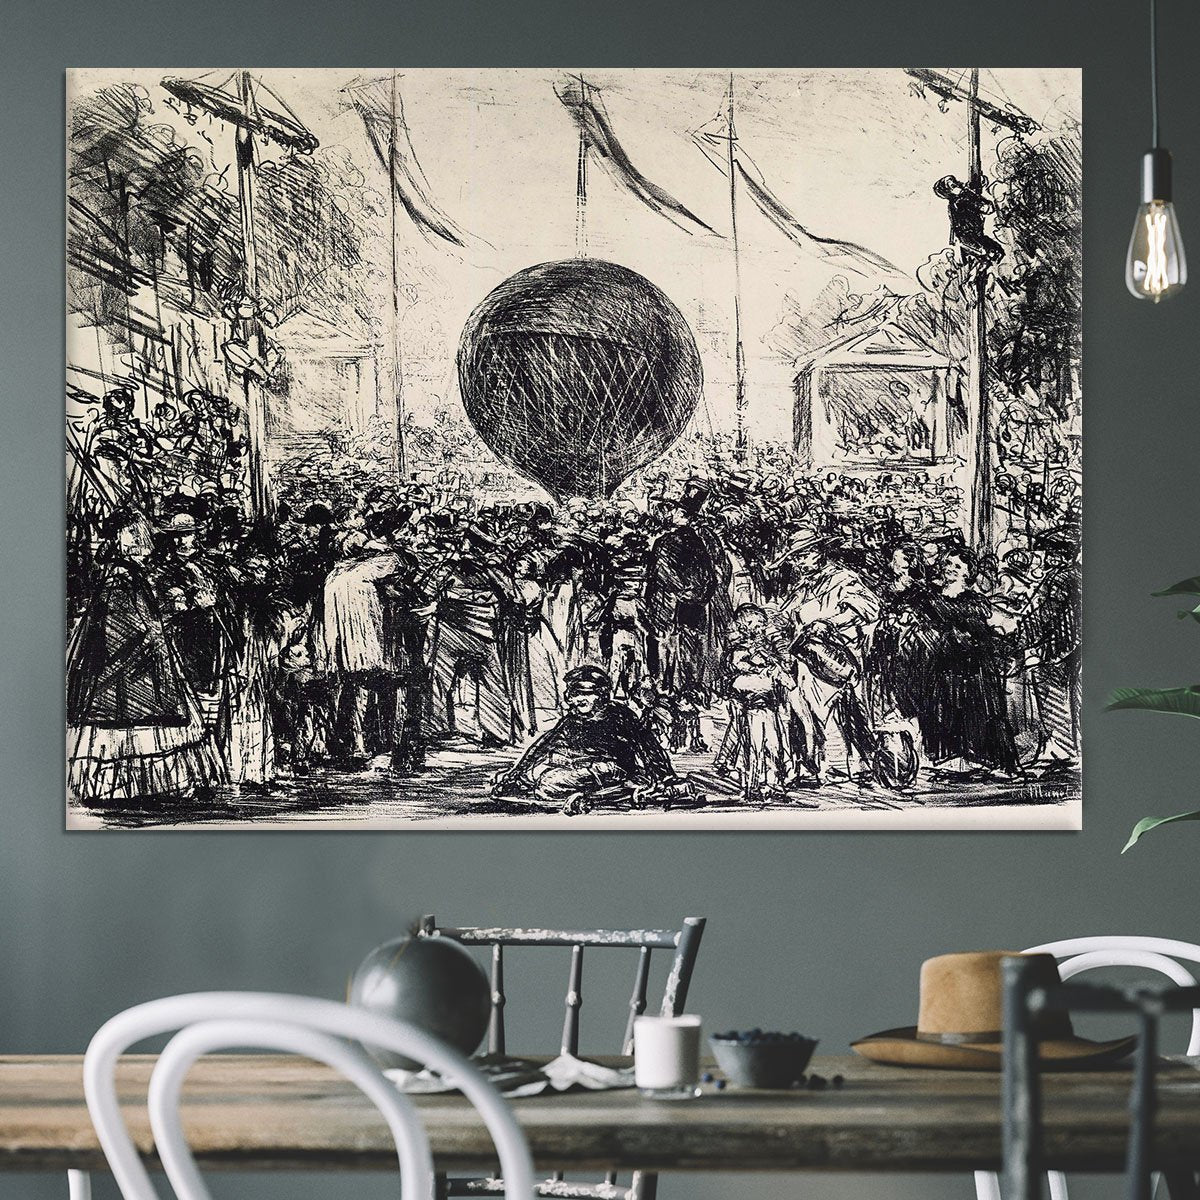 The Balloon by Manet Canvas Print or Poster